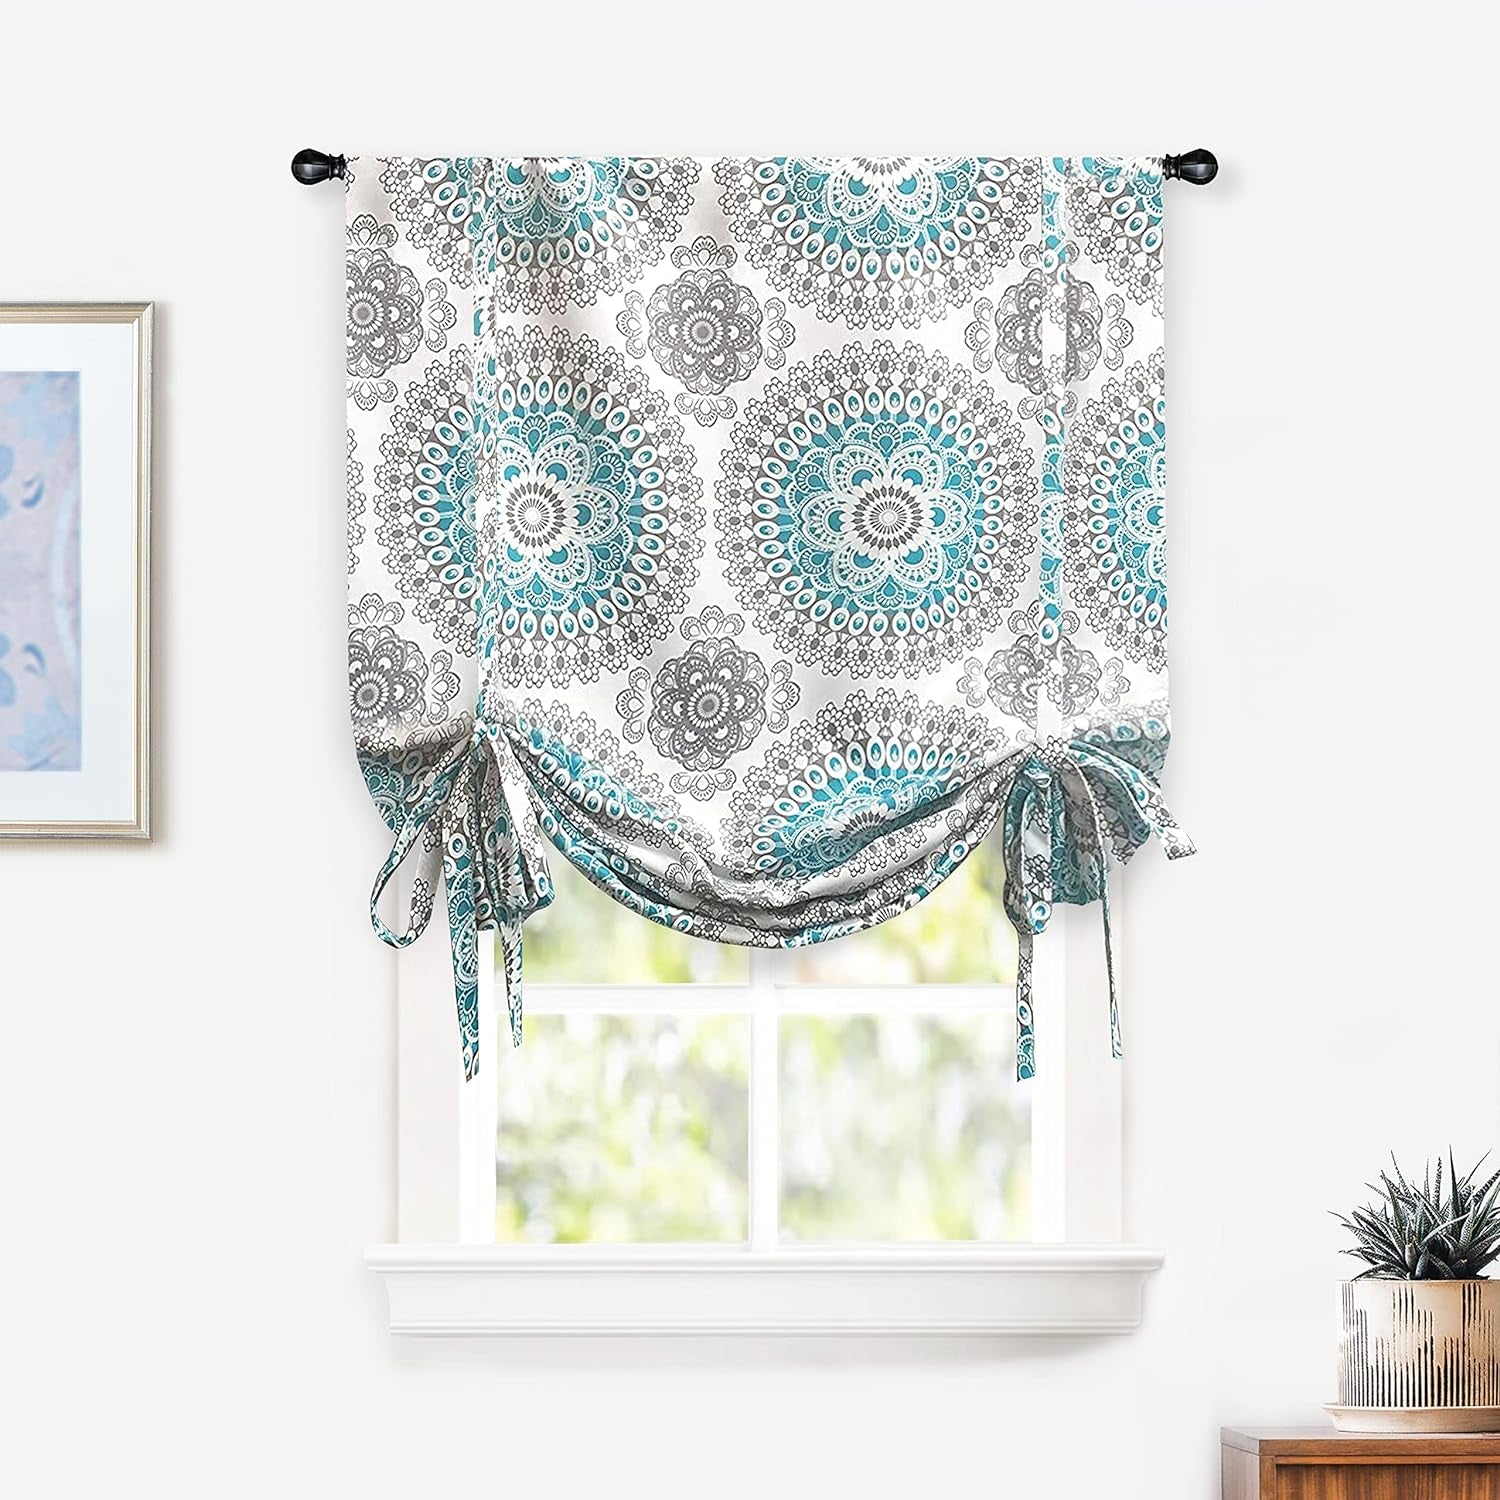 Driftaway Curtains for Bedroom Room Darkening Curtain 25 Inch by 72 Inch Medallion Drapes for French Door Windows Boho Damask Pattern Sidelight Curtain for Front Door Single Panel Aqua and Gray  DriftAway Aqua/Grey (3)25"X47" | Tie Up 